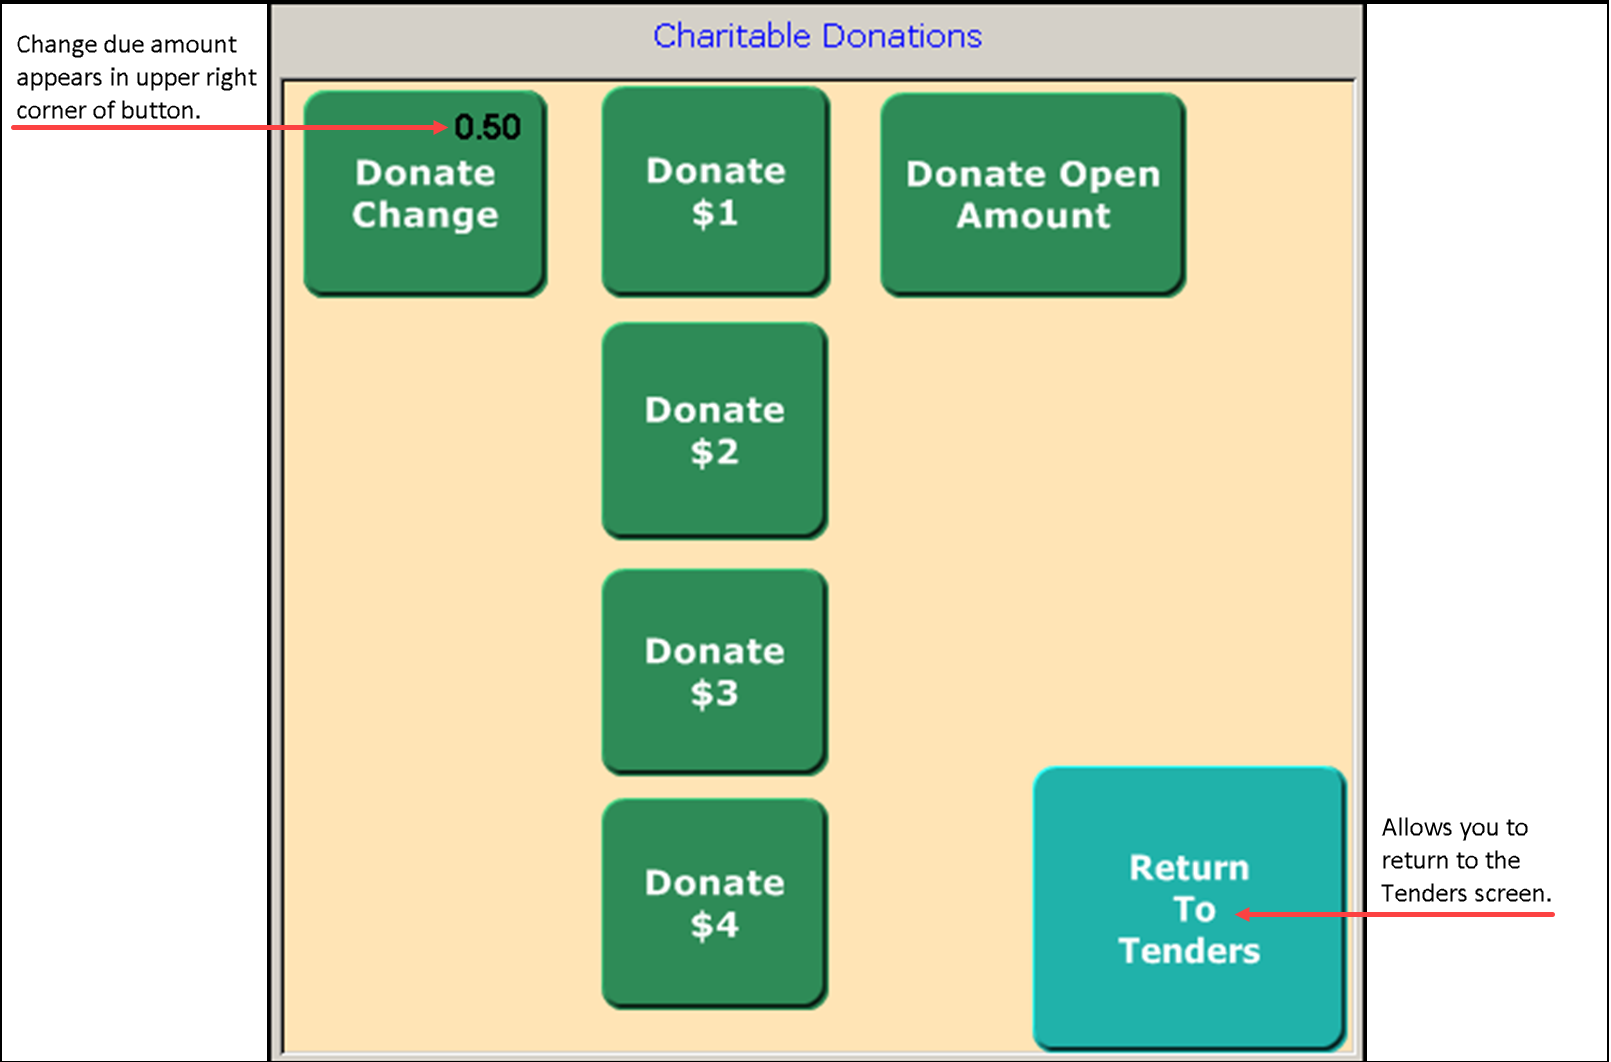 Change due amount appears in uppor right corner of Donate Change button